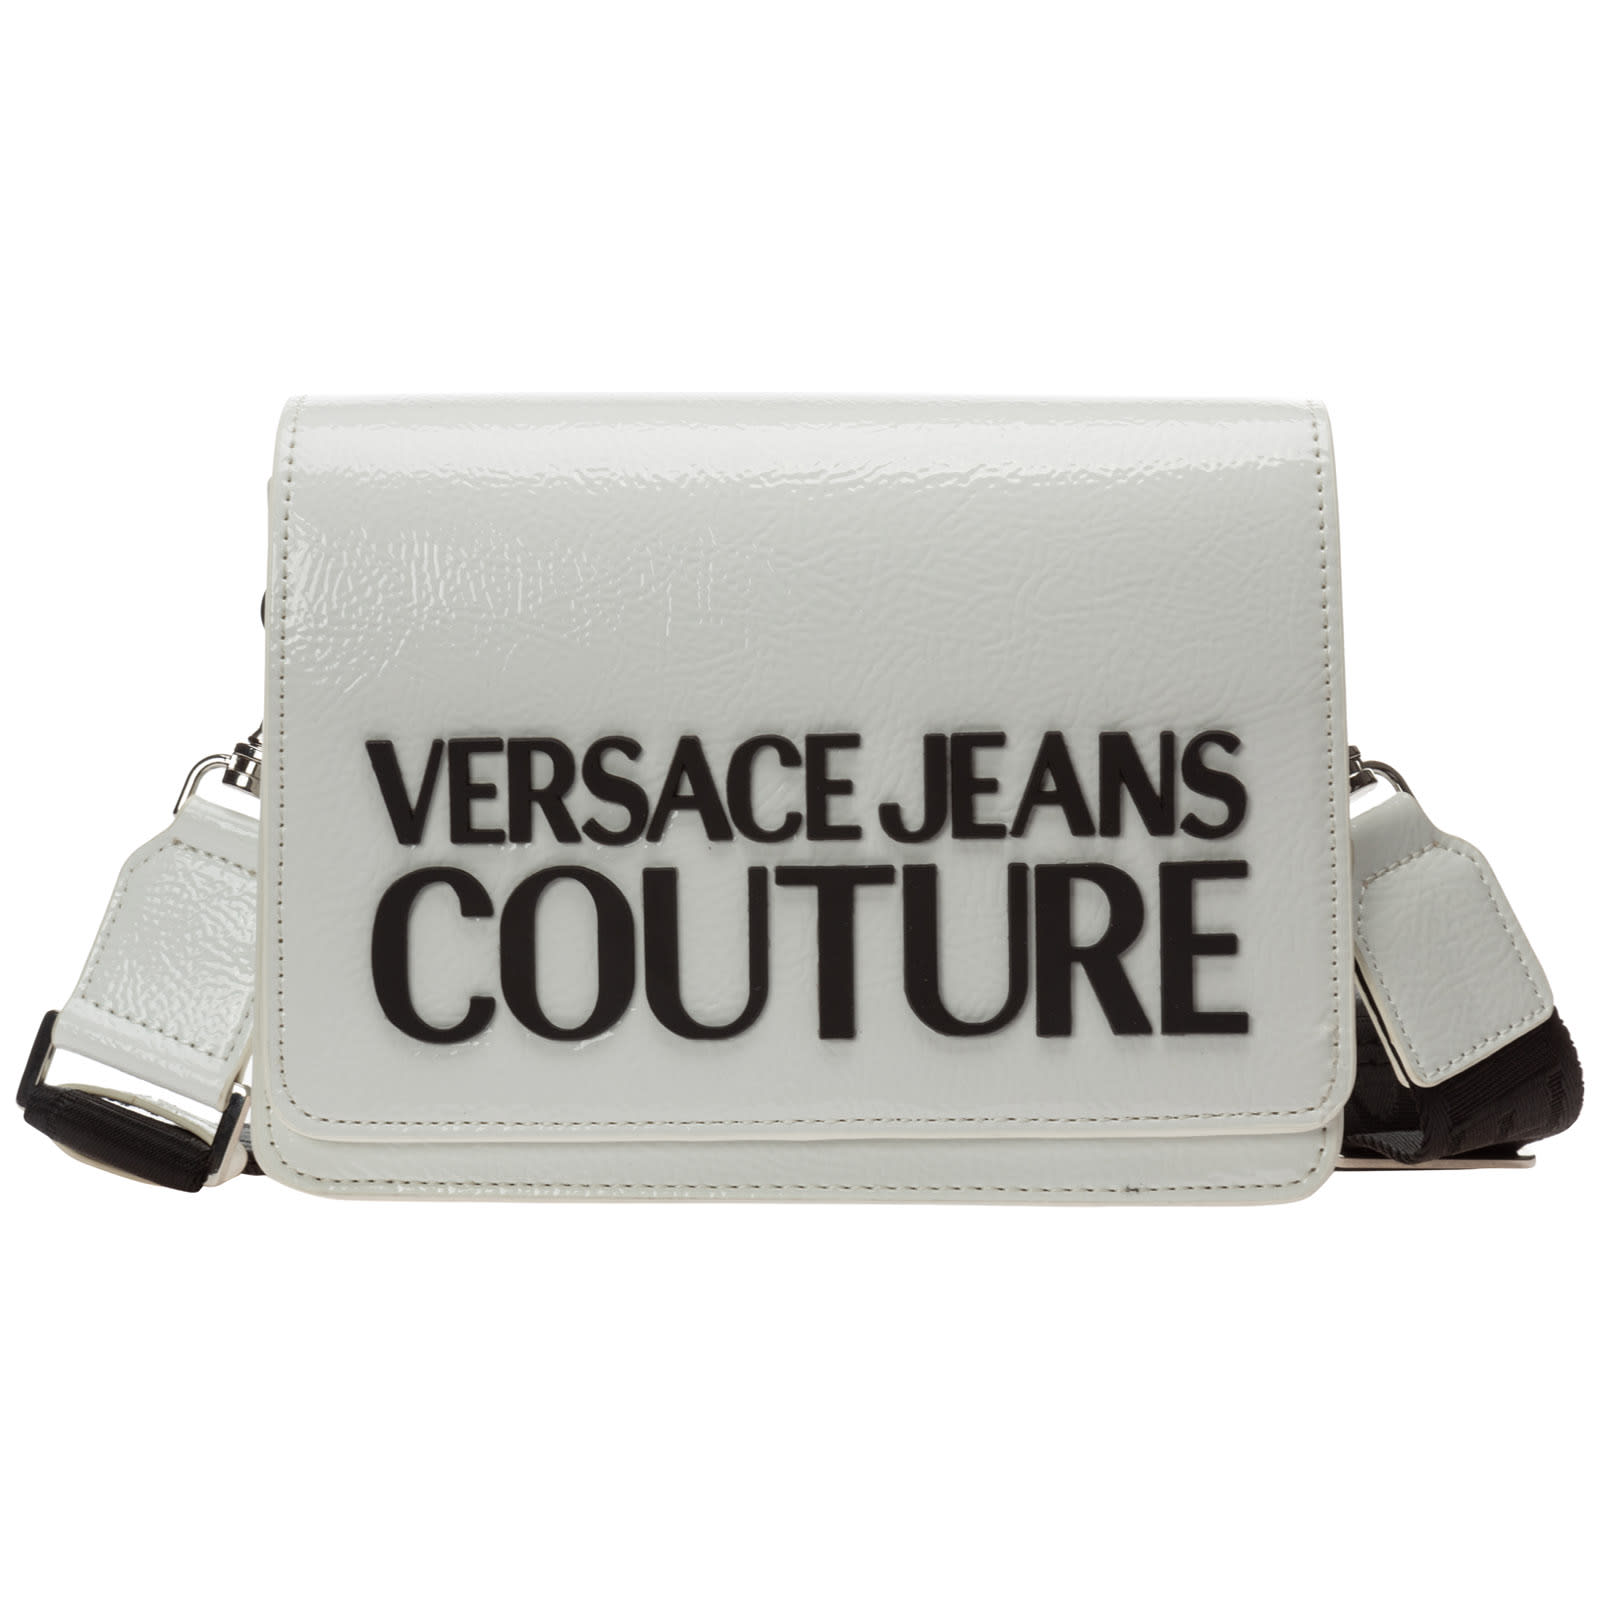 VERSACE JEANS COUTURE ICON CROSSBODY BAGS,11280809